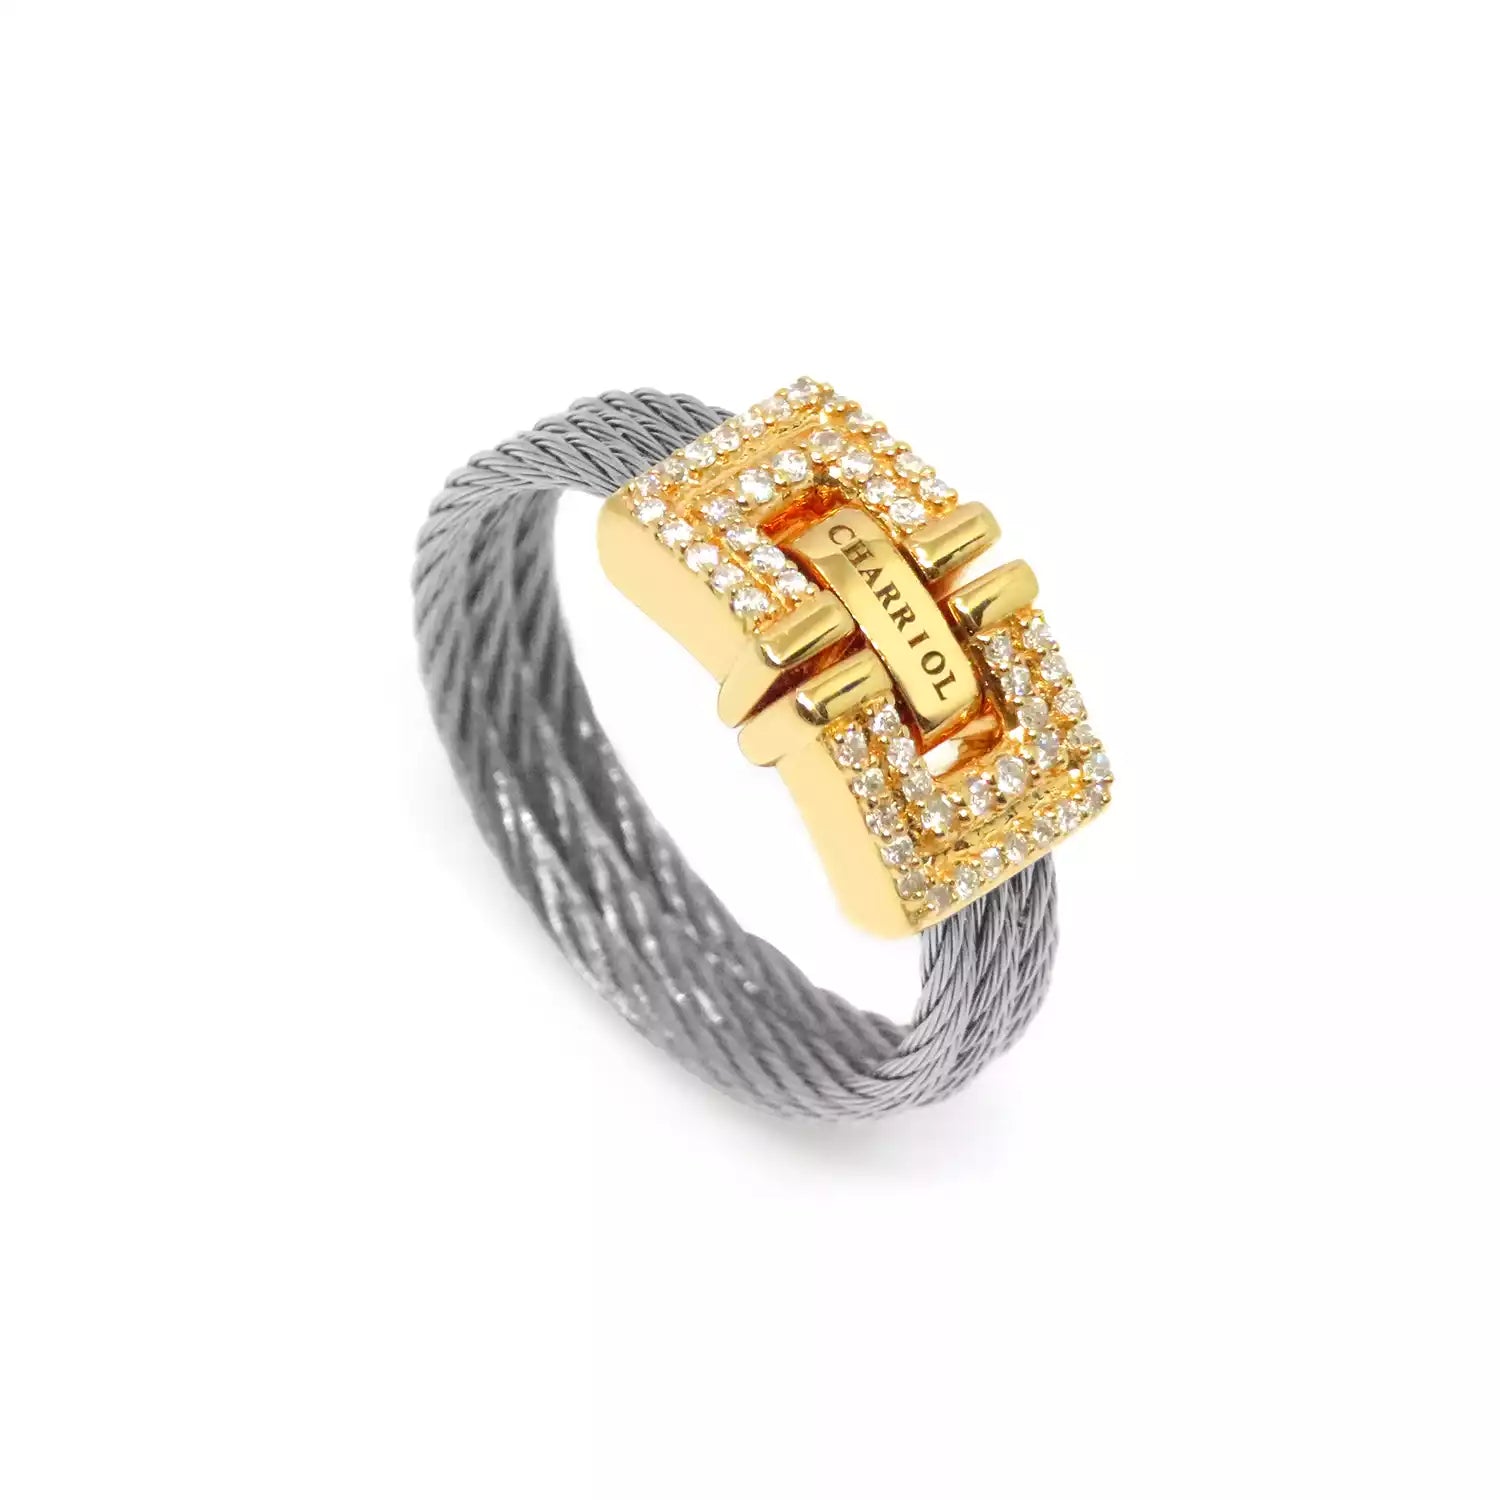 Steel_Gold 18KT with 54 Diamonds 0.21ct